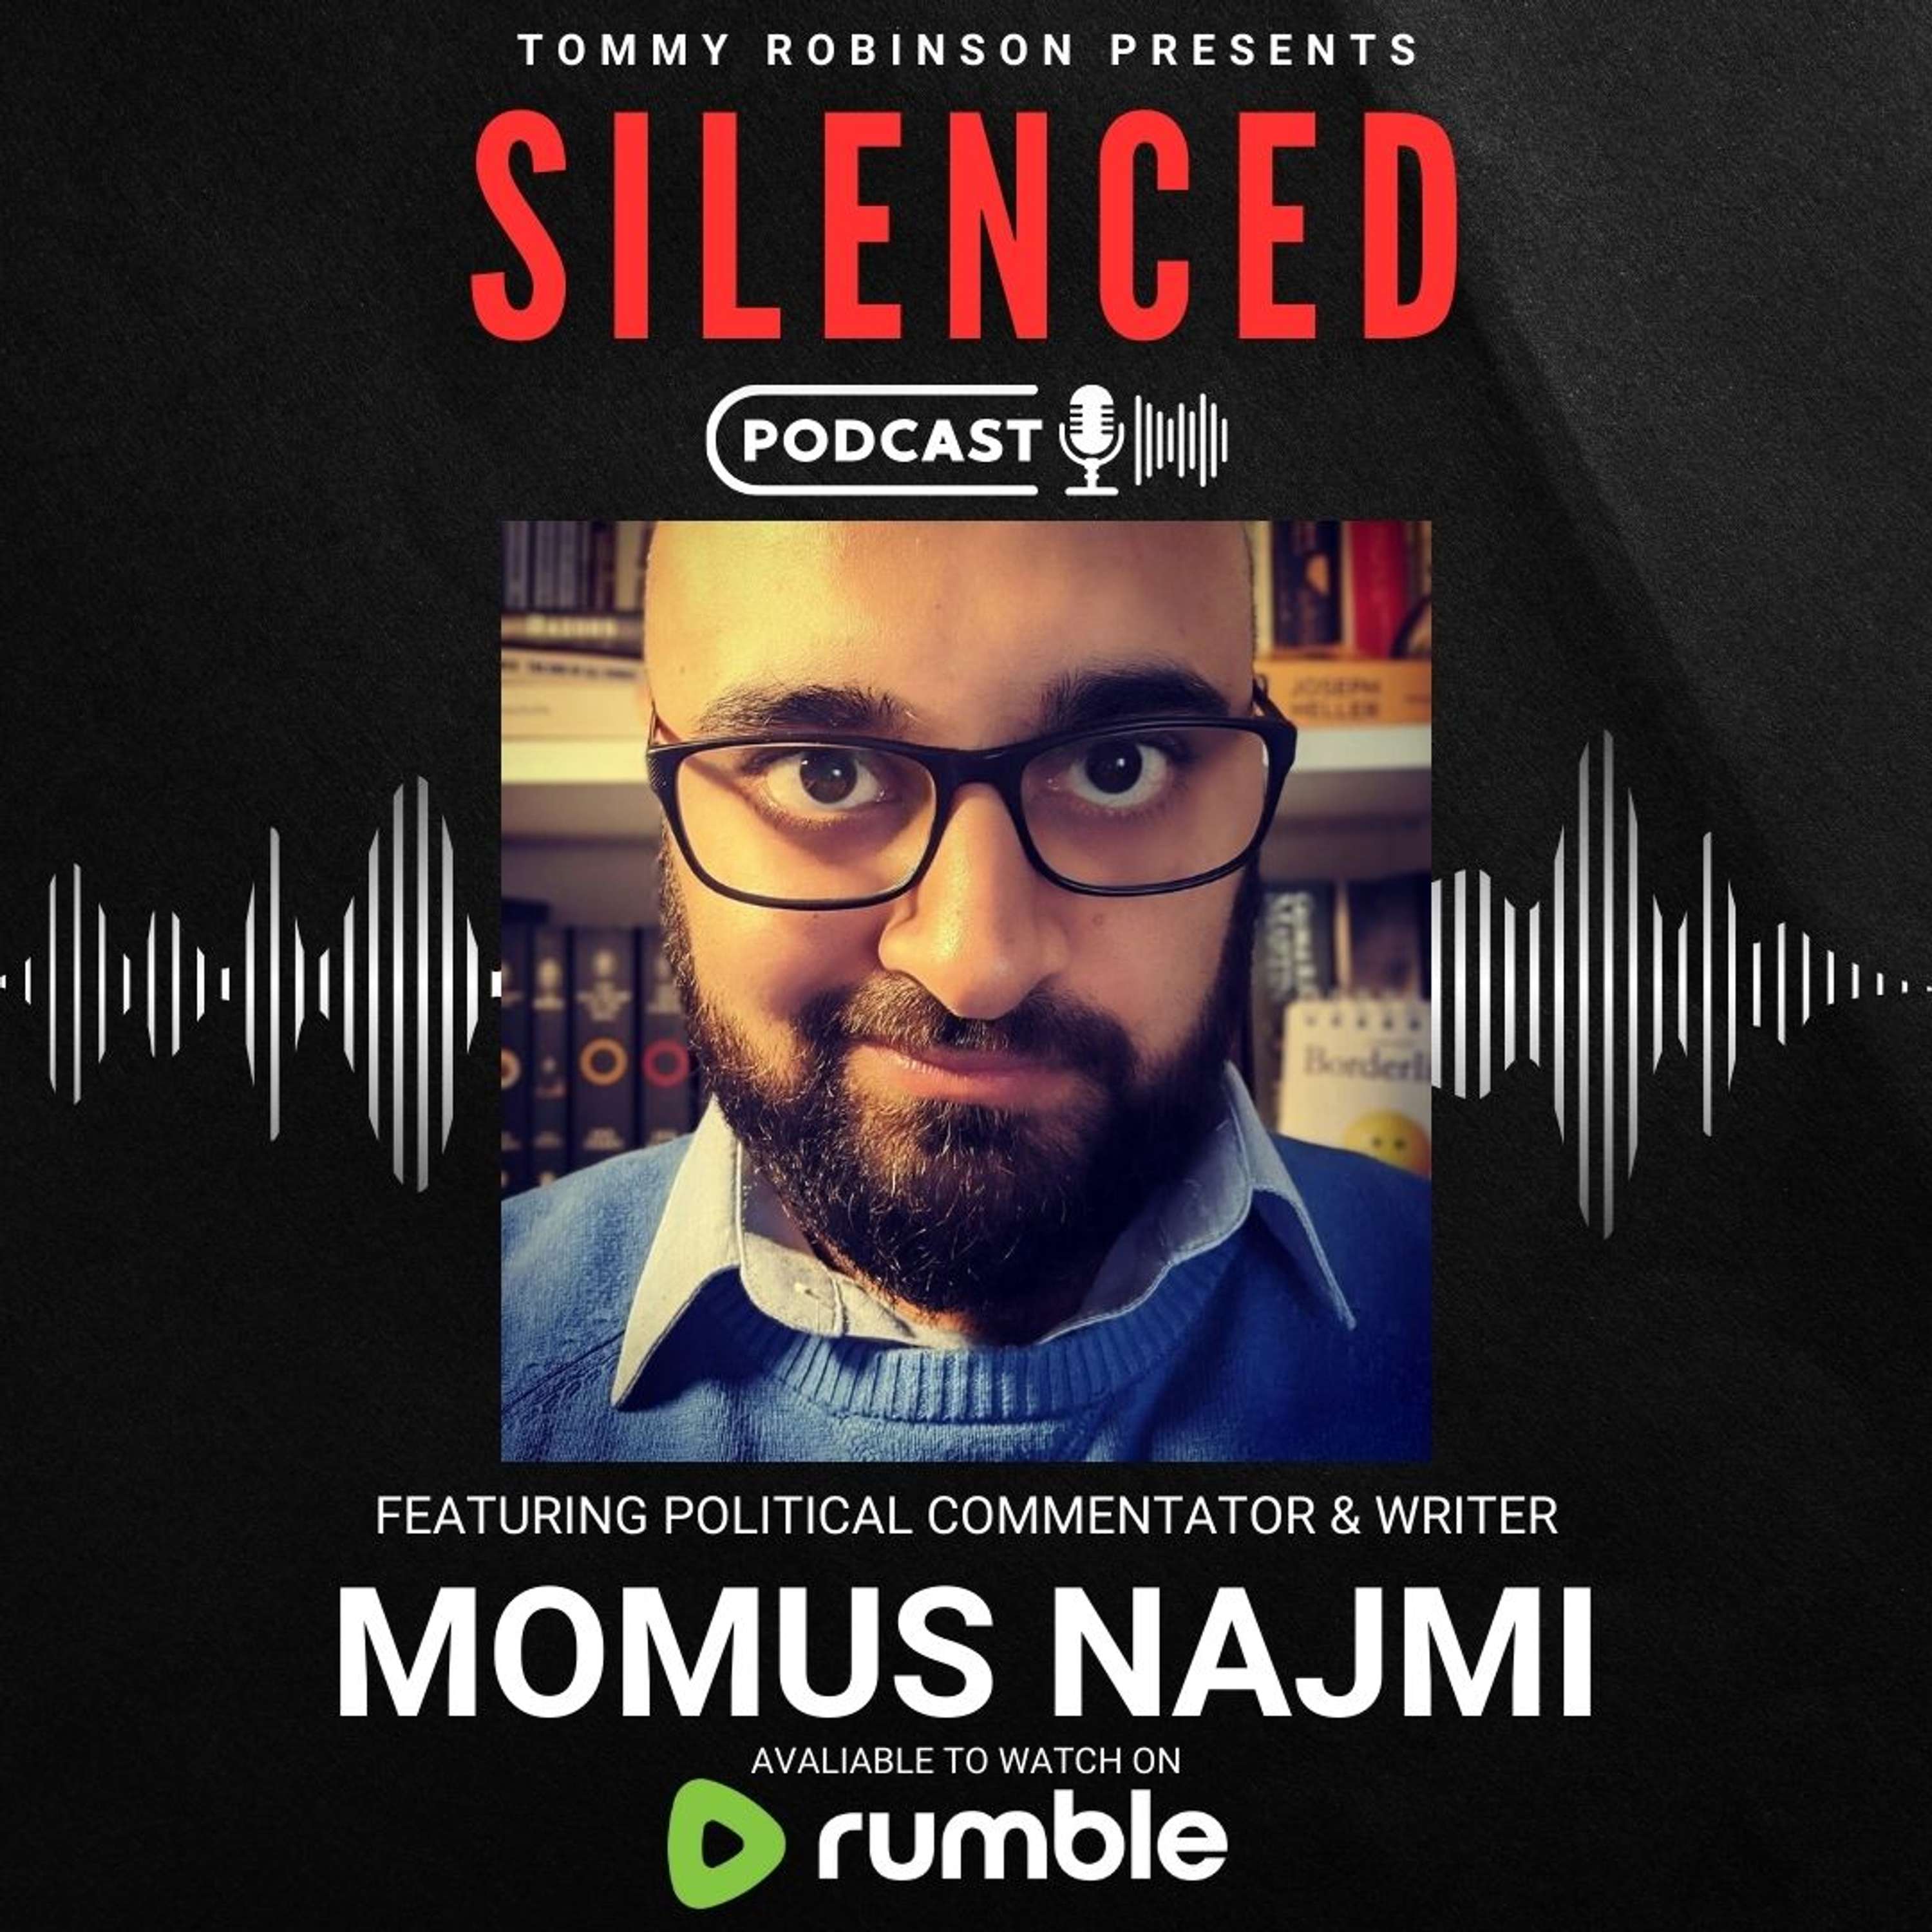 Episode 31 - SILENCED with Tommy Robinson - Momus Najmi